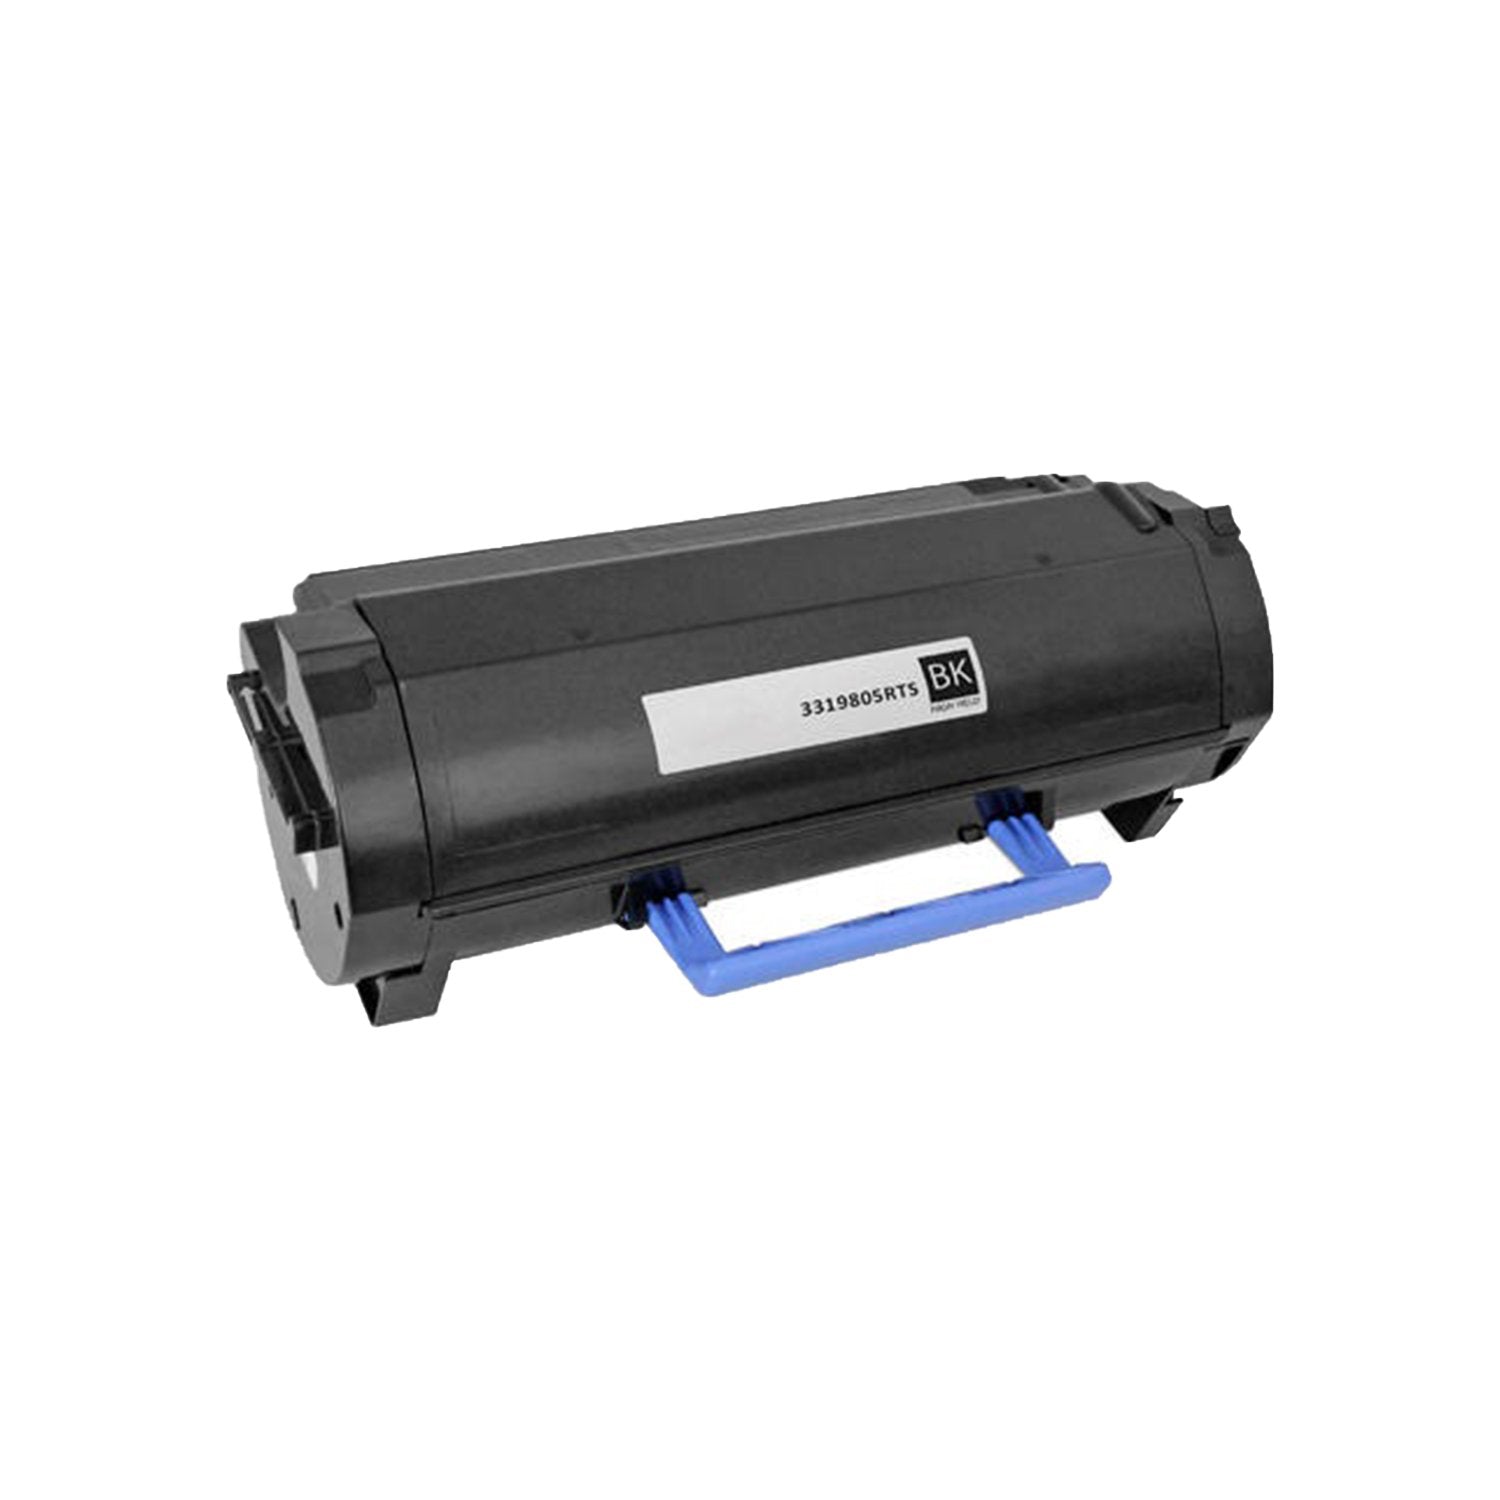 Absolute Toner Compatible Dell 331-9805 High Yield Black Toner Cartridge | Absolute Toner Dell Toner Cartridges